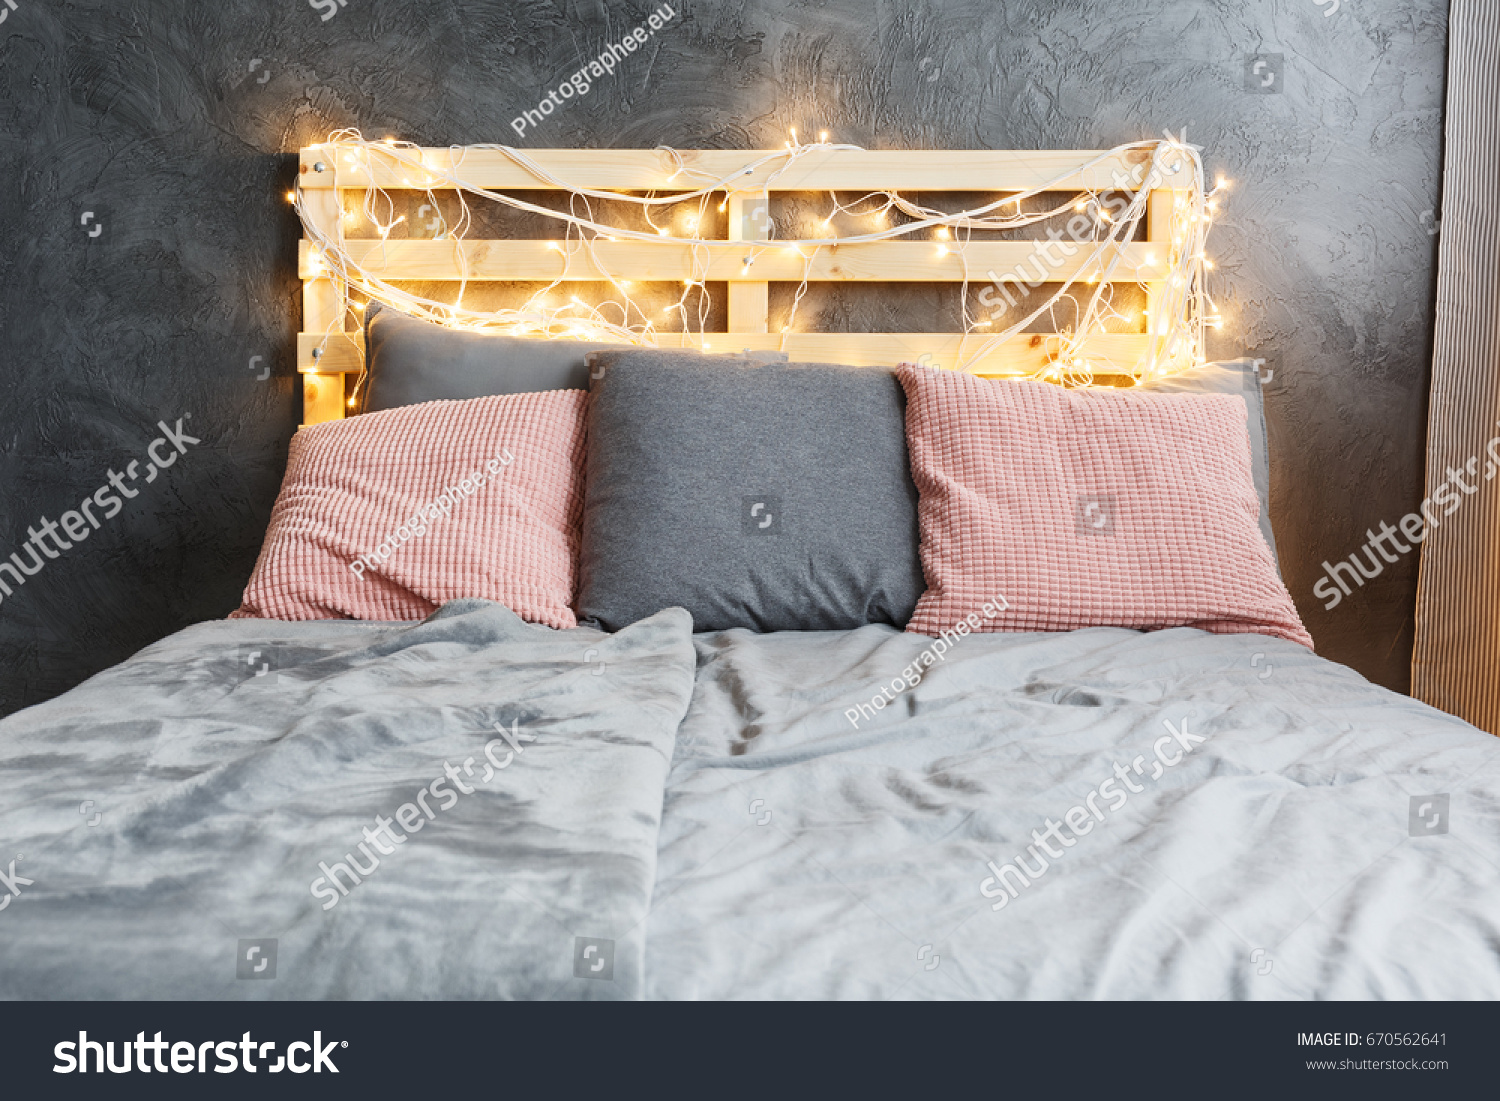 Cozy dreamy bed with decorated DIY pallet headboard #670562641